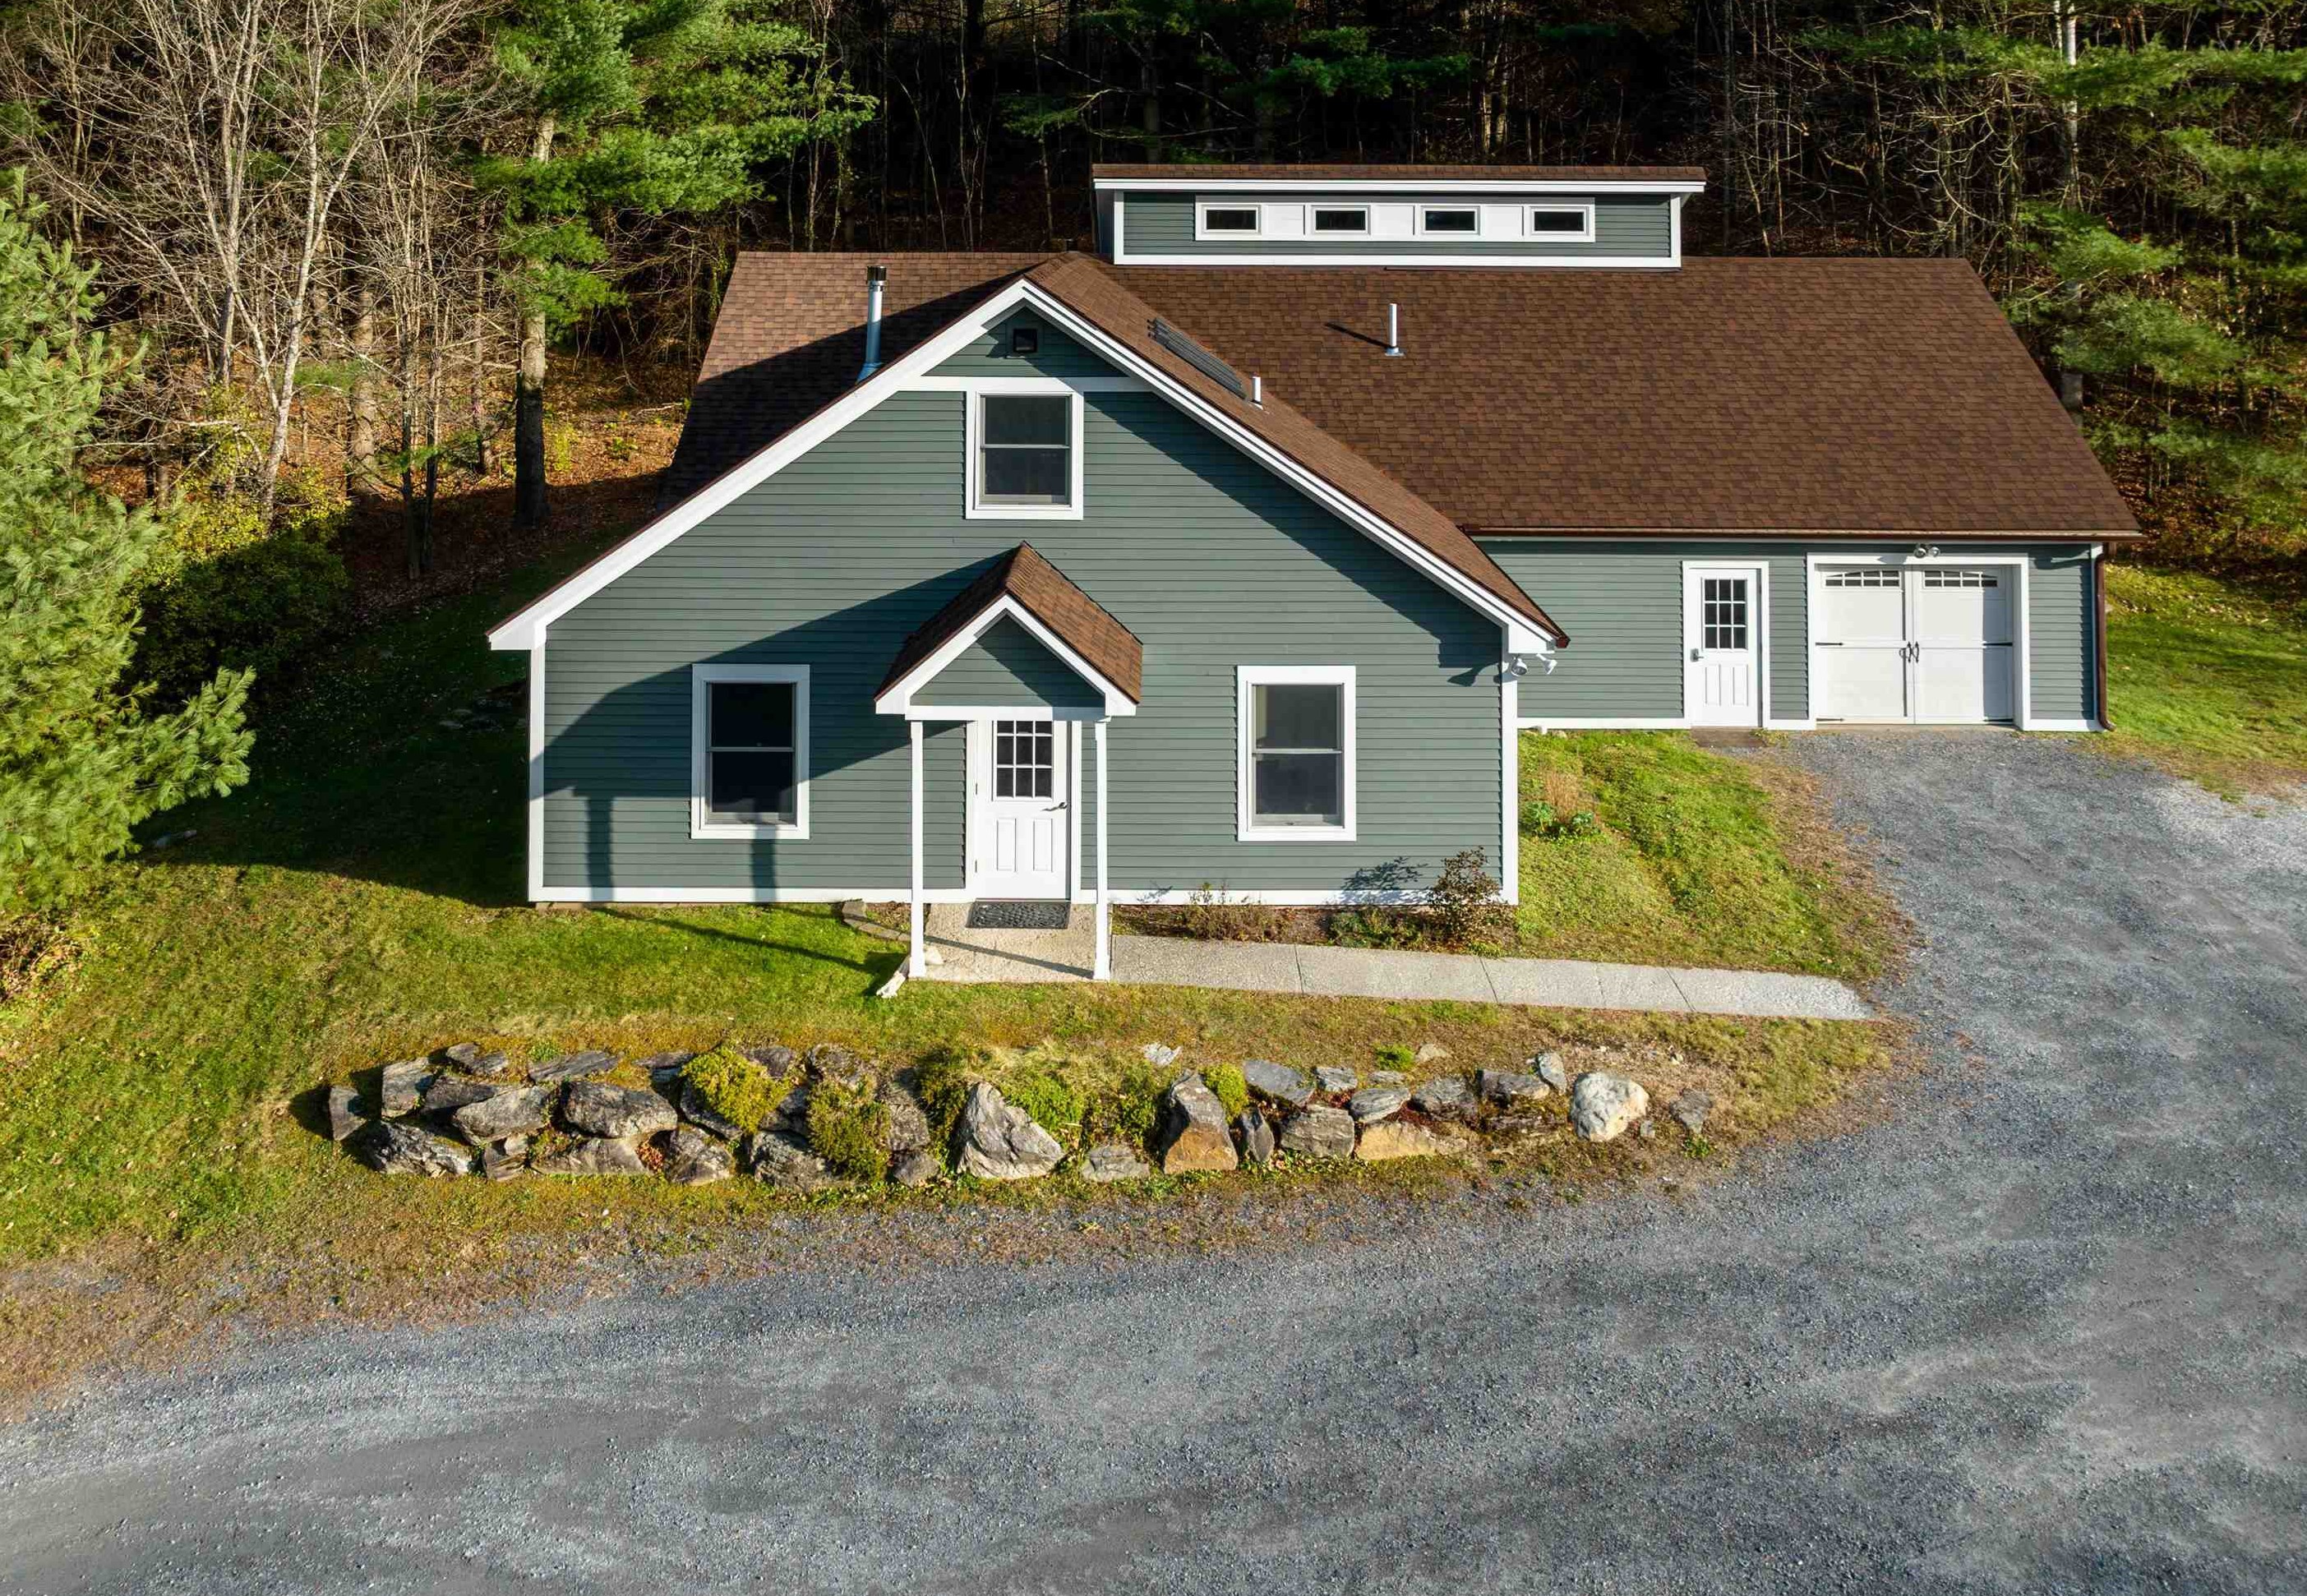 68 Central Drive, Stowe, VT 05672